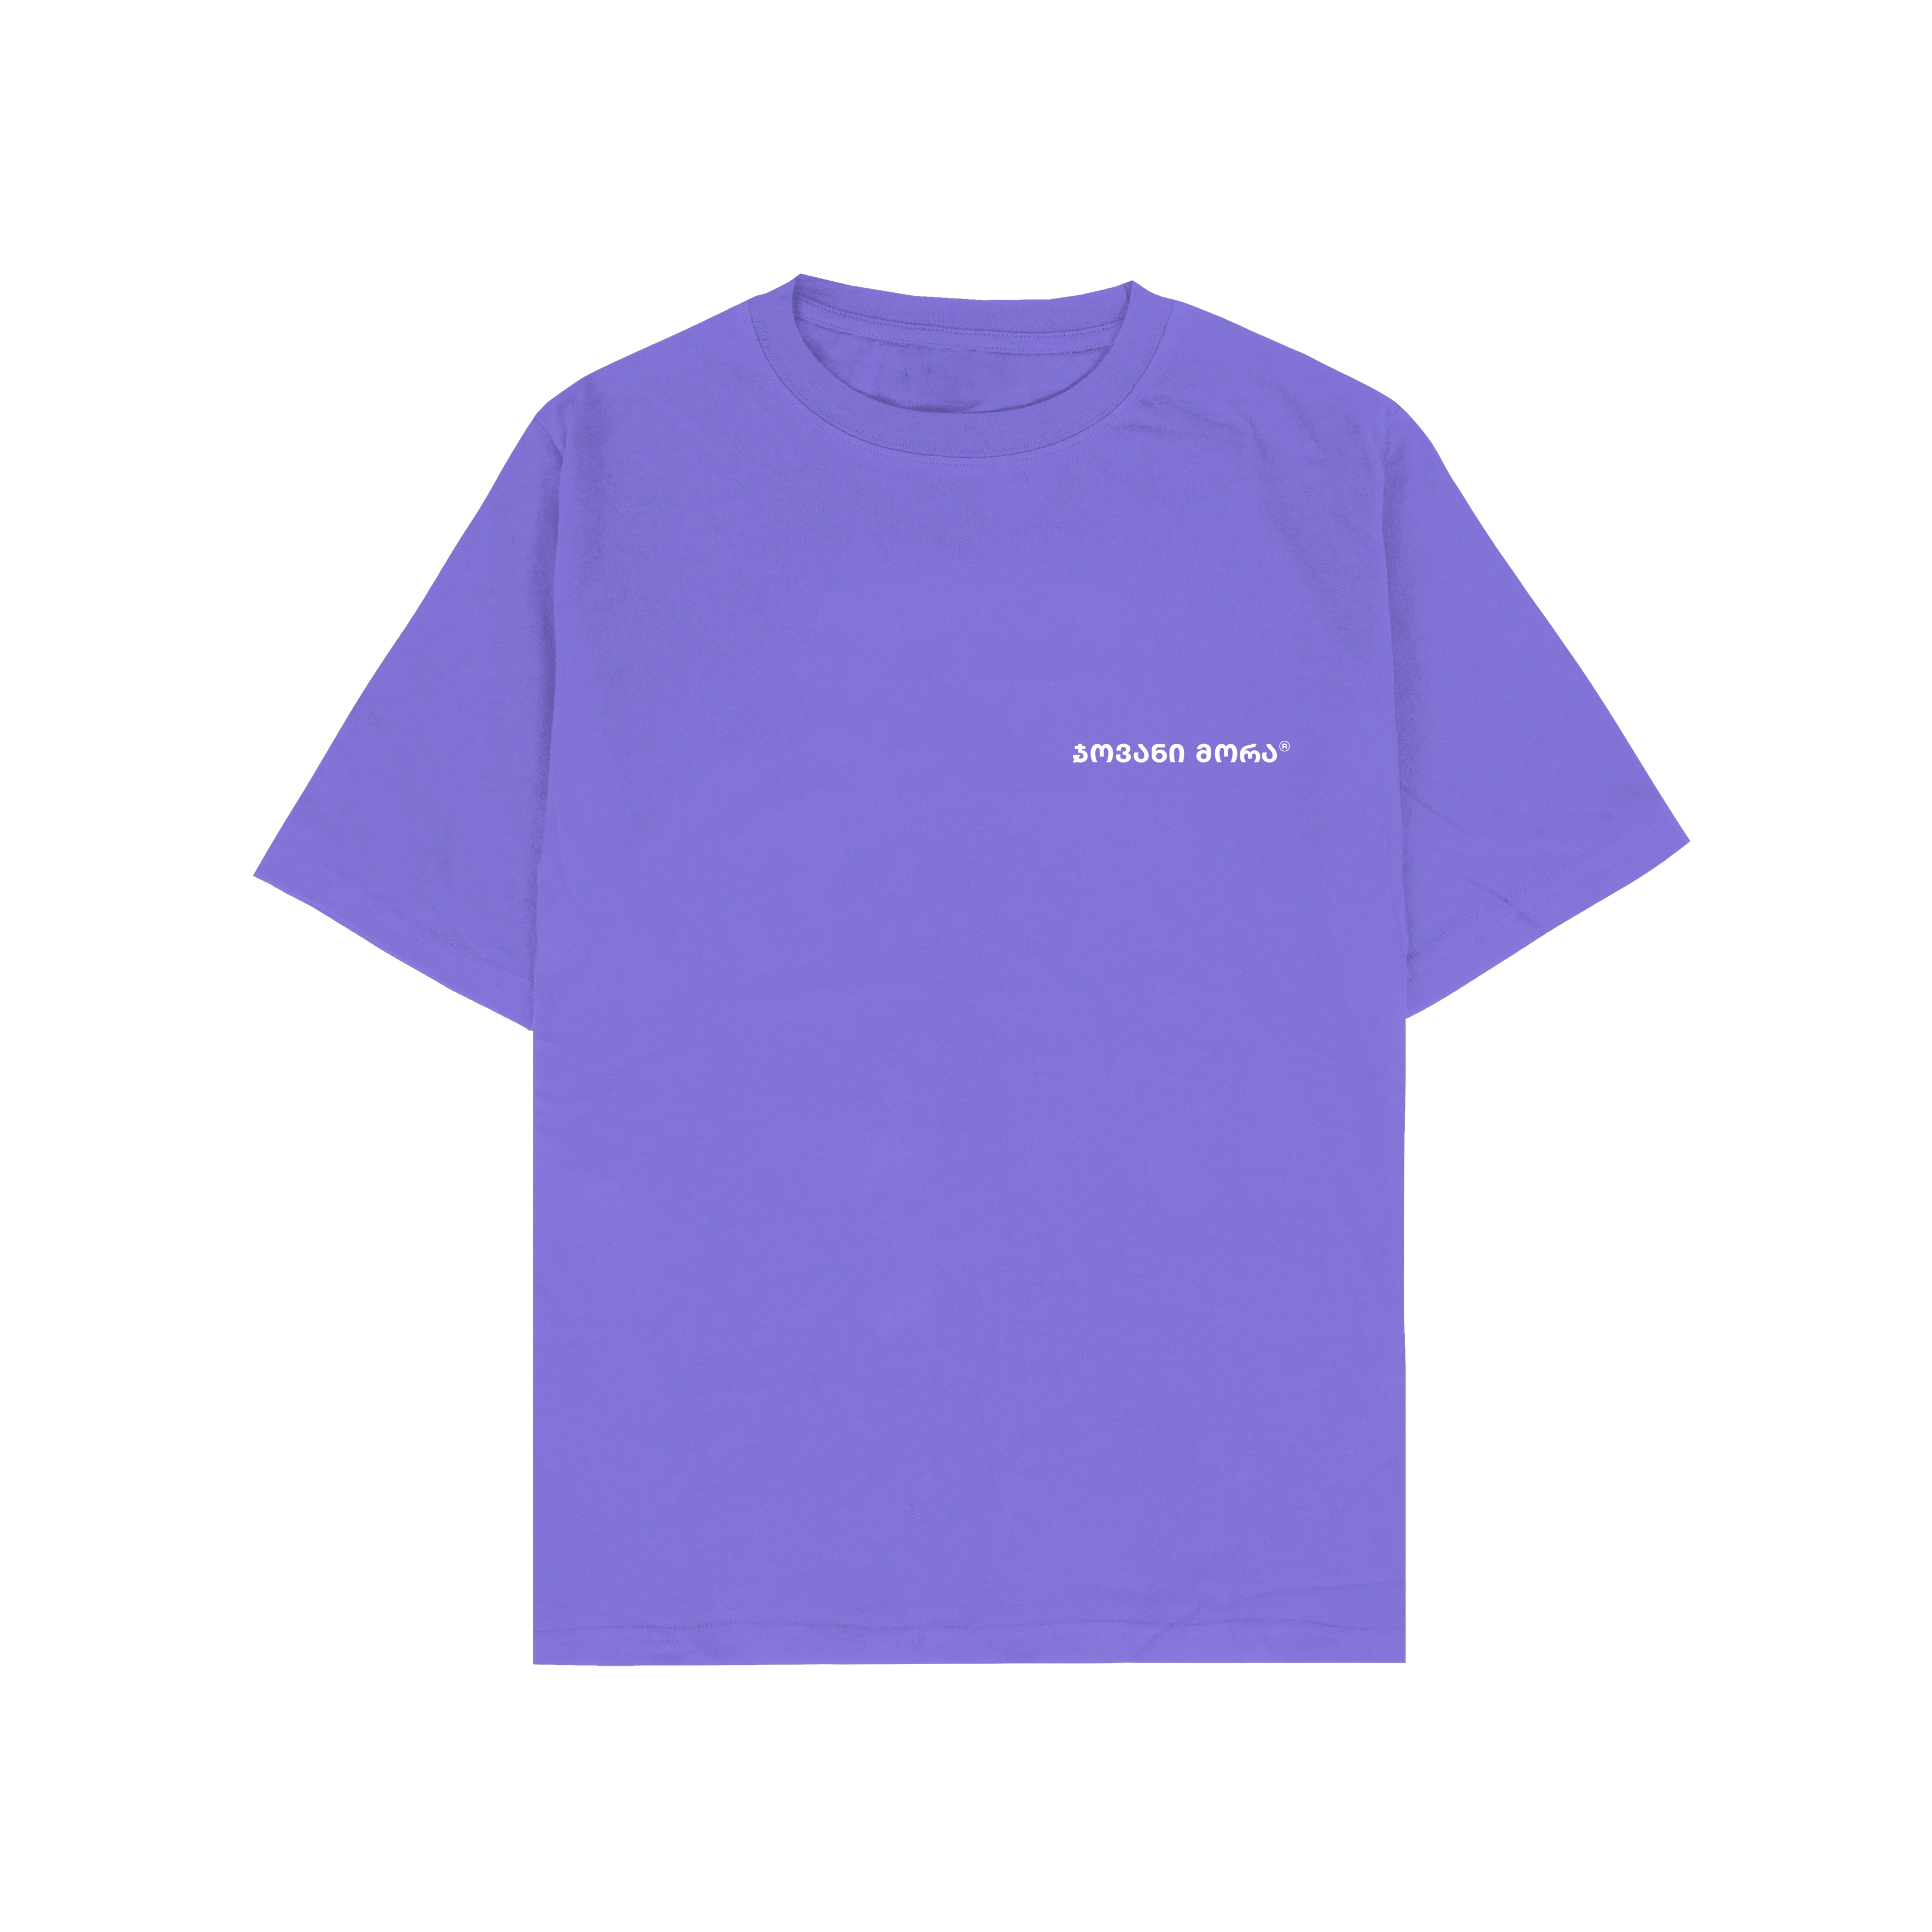 T-shirt (Purple), Relaxed Fit